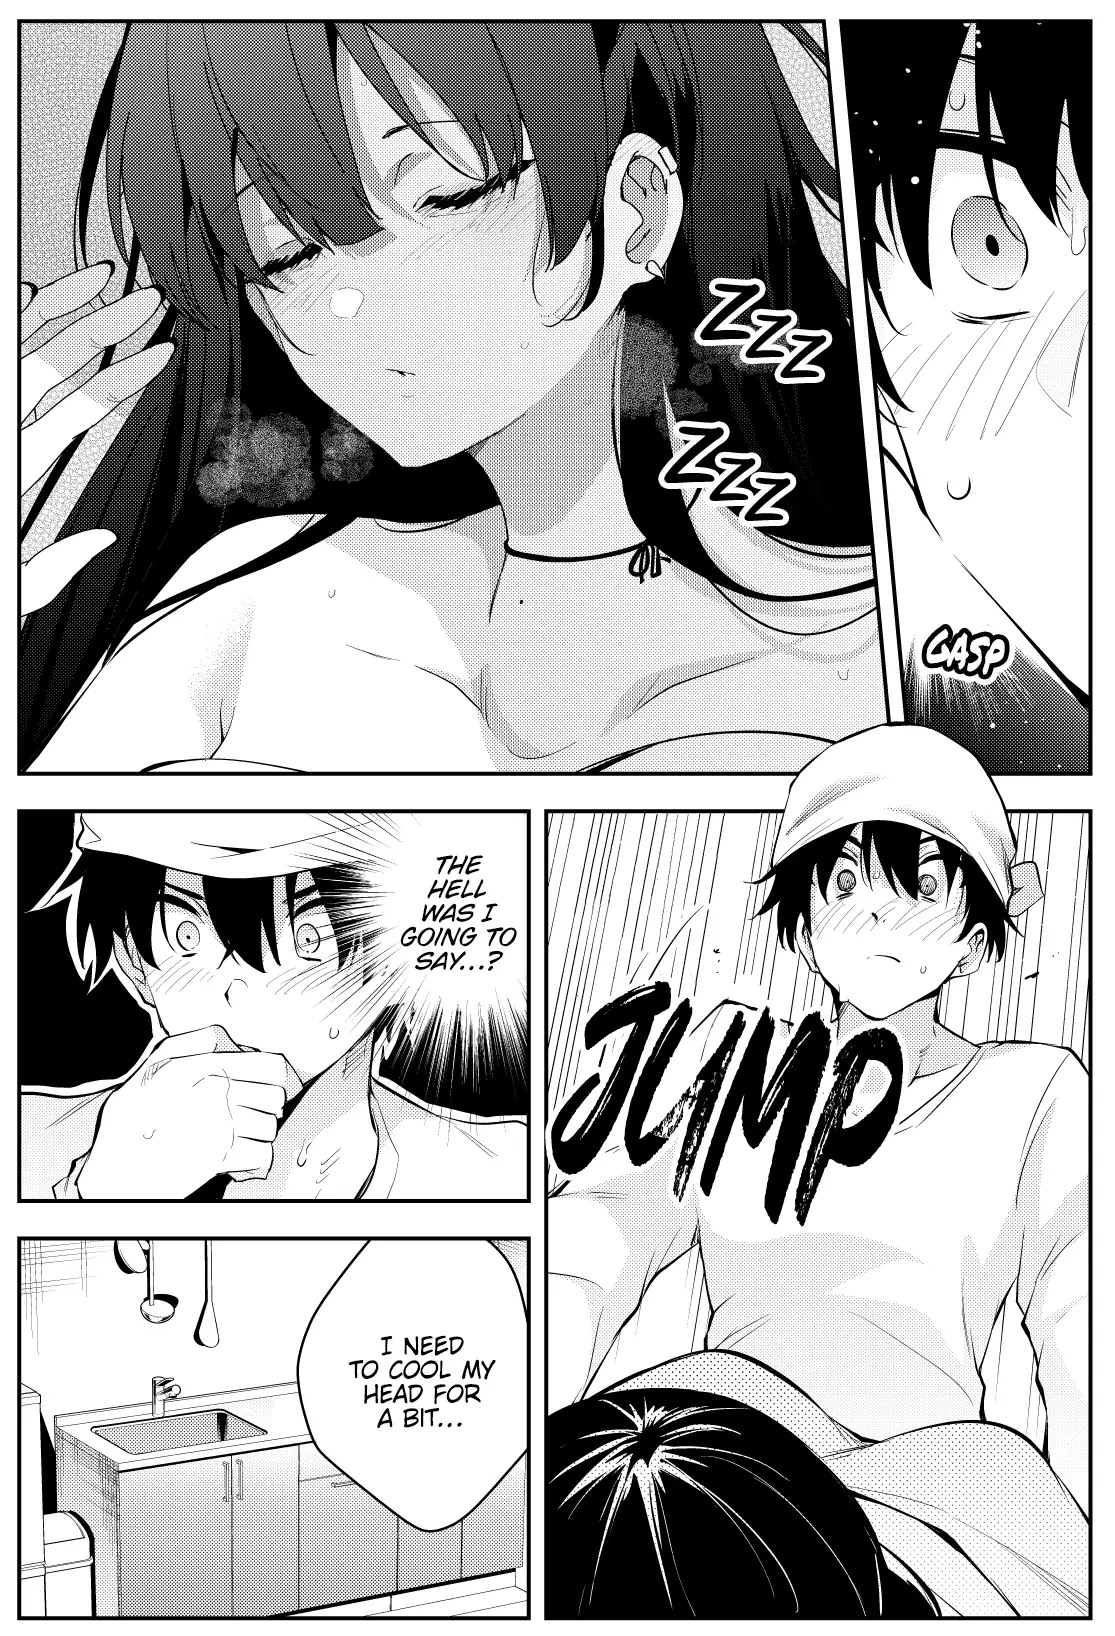 The Story Of A Manga Artist Confined By A Strange High School Girl - 47 page 2-7f1af843